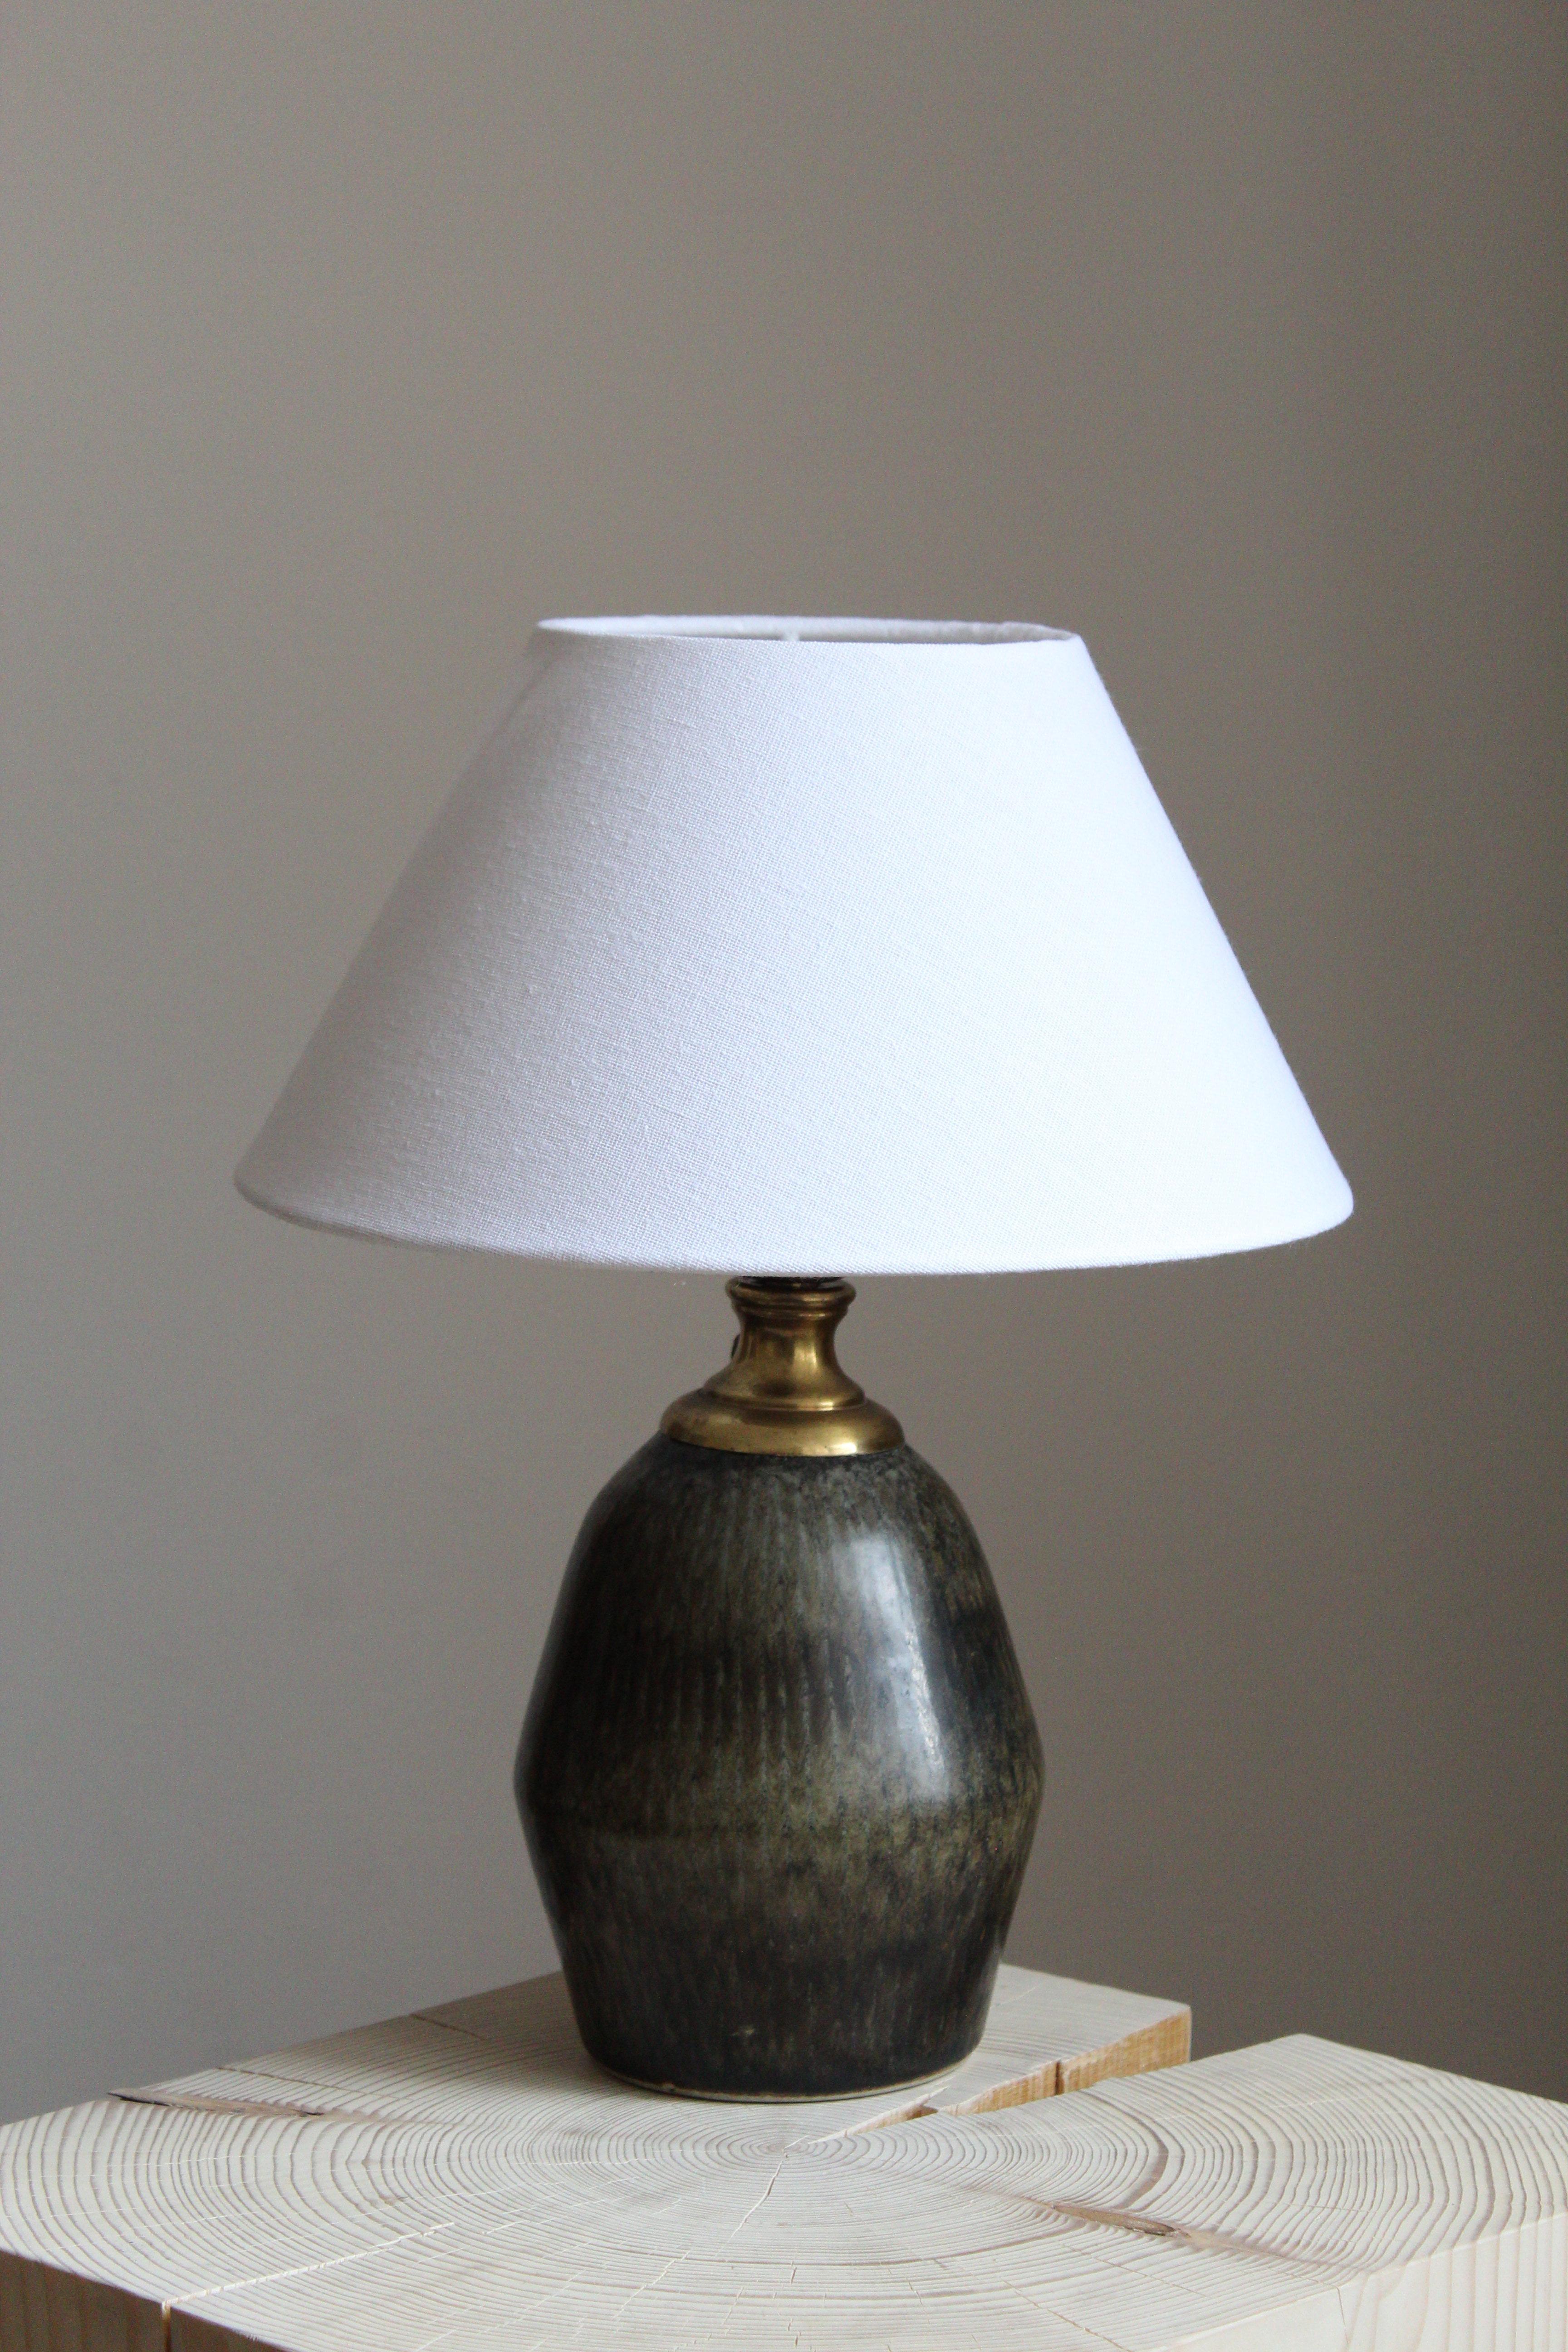 A unique table lamp by Carl-Harry Stålhane for the iconic Swedish firm Rörstrand. Signed

Stated dimensions exclude lampshade. Height includes the socket. Sold without lampshade.

Glaze features brown-green colors.

Other ceramicists of the period